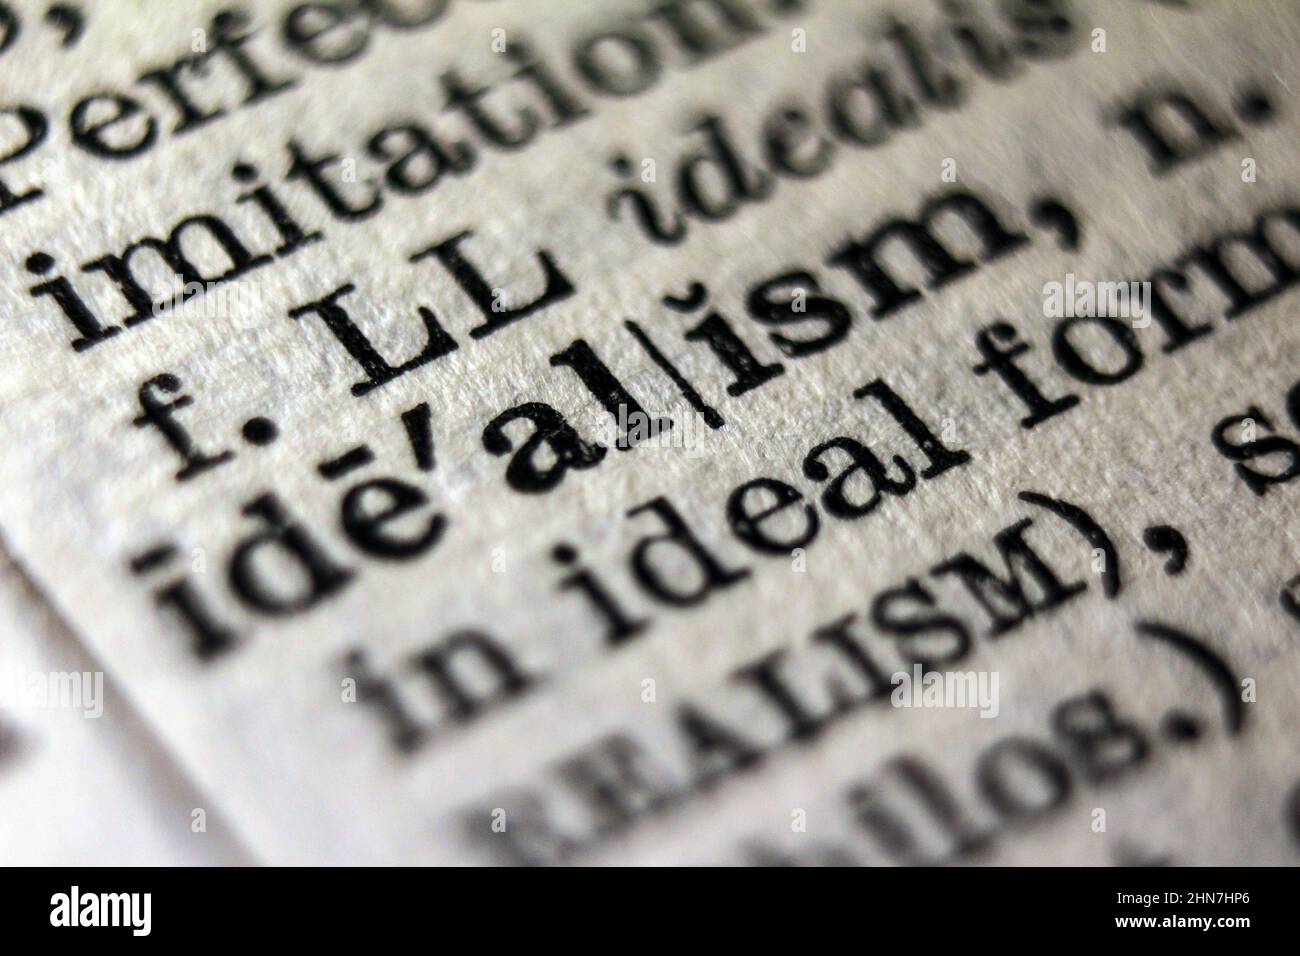 Word 'idealism' printed on dictionary page, macro close-up Stock Photo